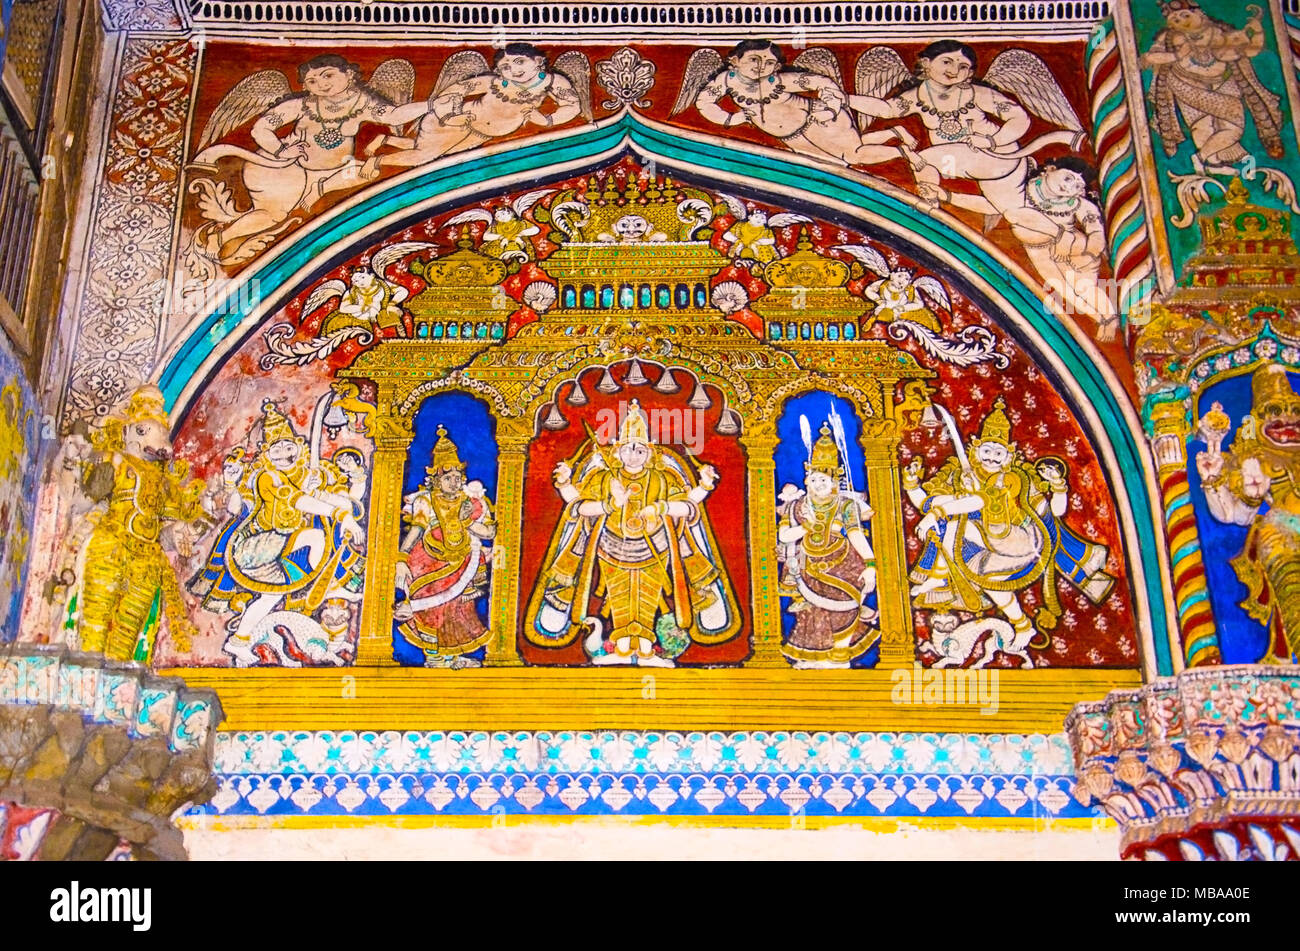 Colorful paintings on ceiling wall of Darbar Hall of the Thanjavur Maratha palace, Thanjavur, Tamil Nadu, India. Known locally as  residence of the Bh Stock Photo